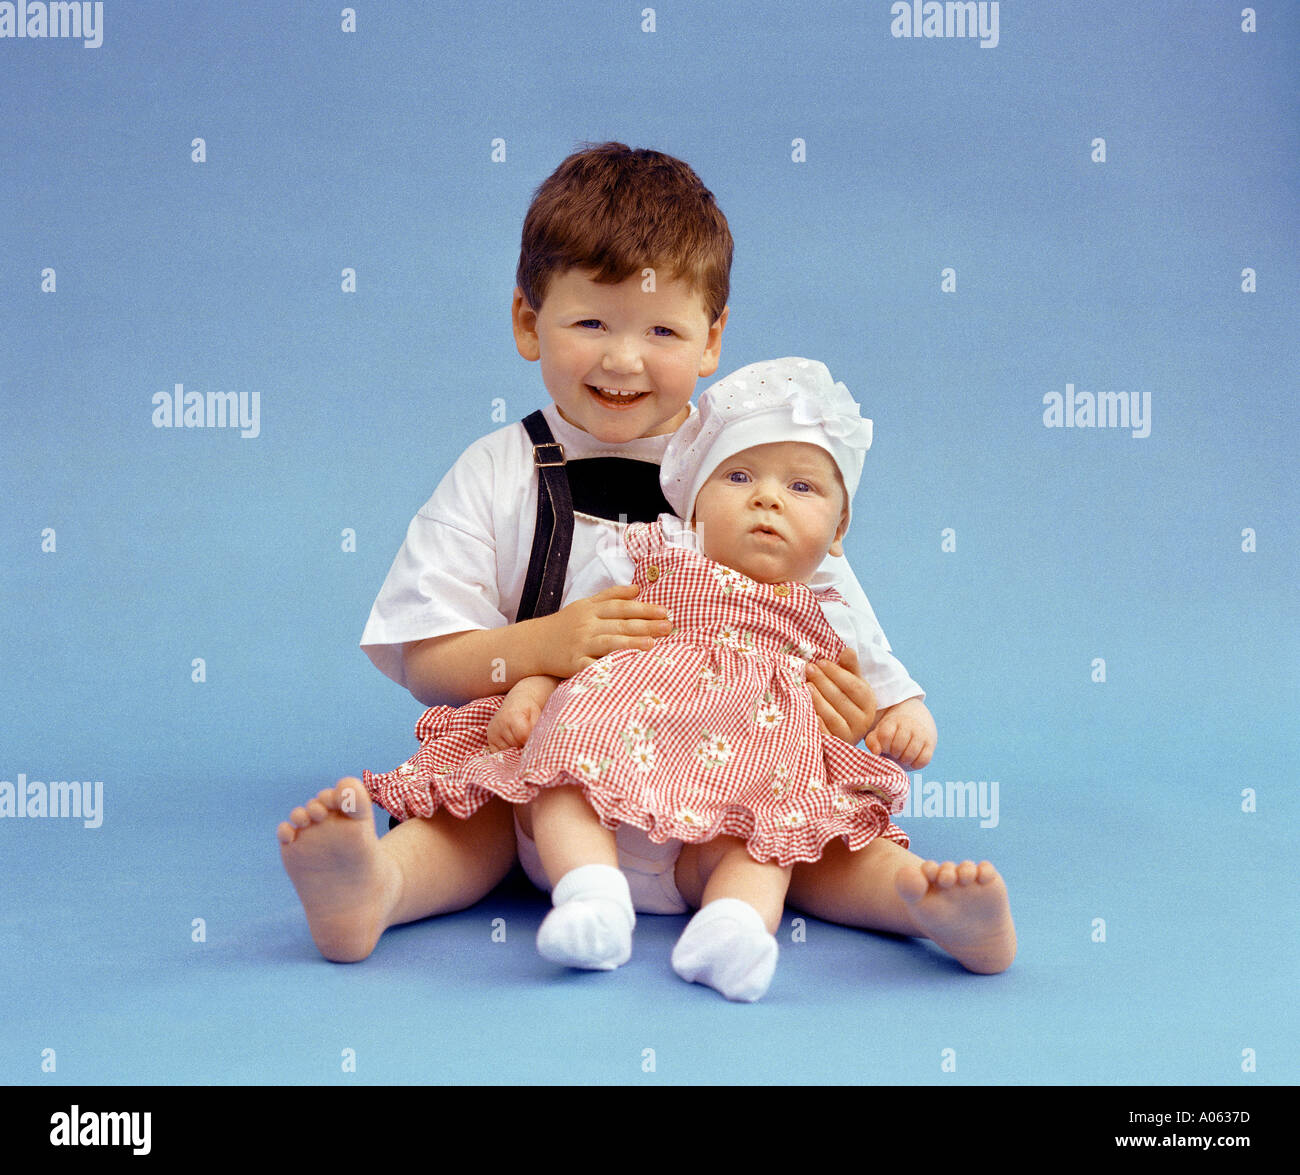 children child little boy in bavarian dress is holding his little sister a baby studio photo blue background Stock Photo